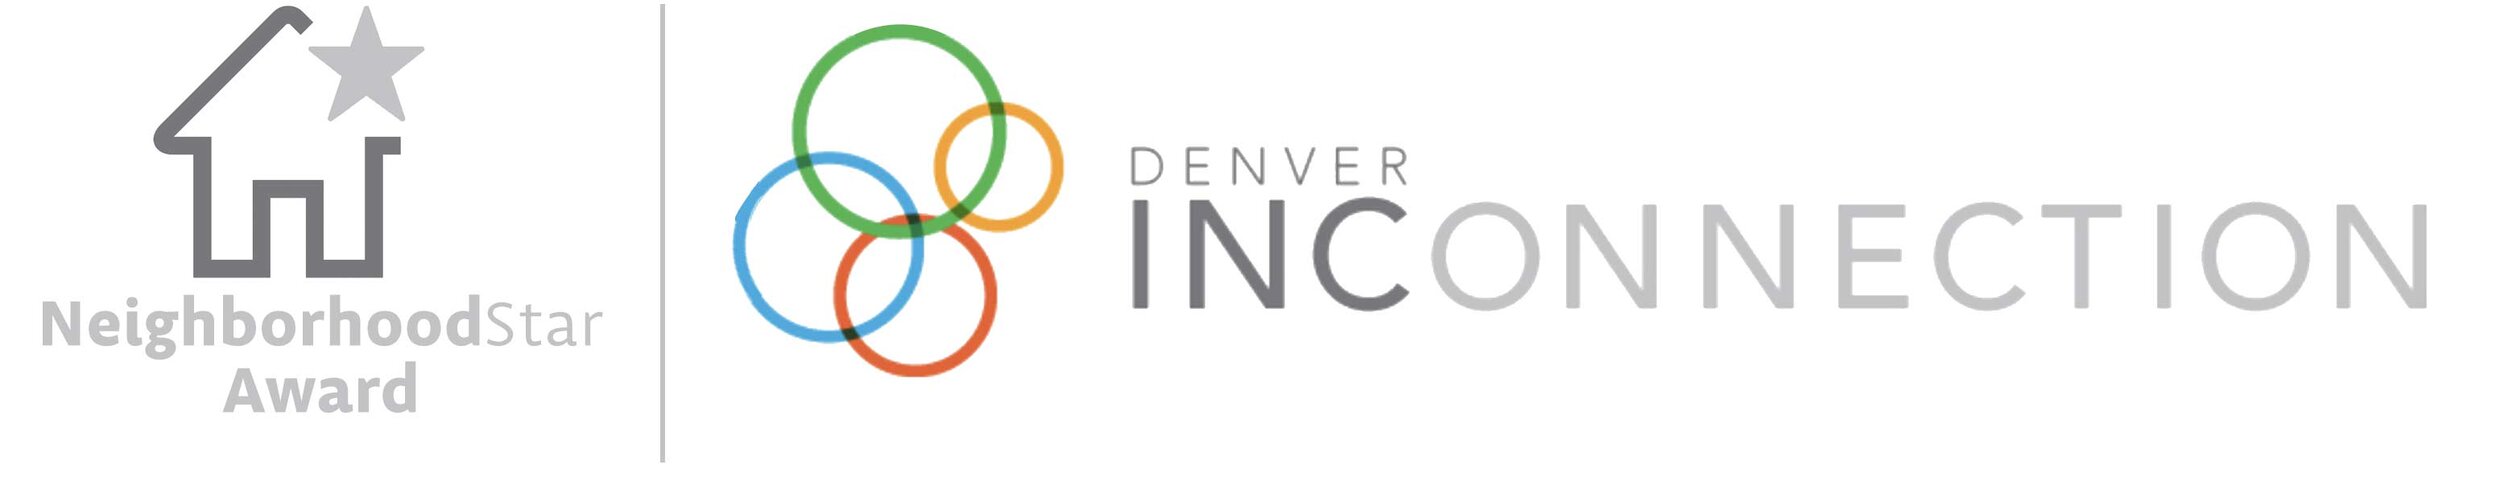 CVC is the winner of the 2021 Neighborhood Star Award from Denver Inter-Neighborhood Connection (INC), which connects Registered Neighborhood Organizations across the city. We received this award for our commitment to working with RNOs, neighbors, v…